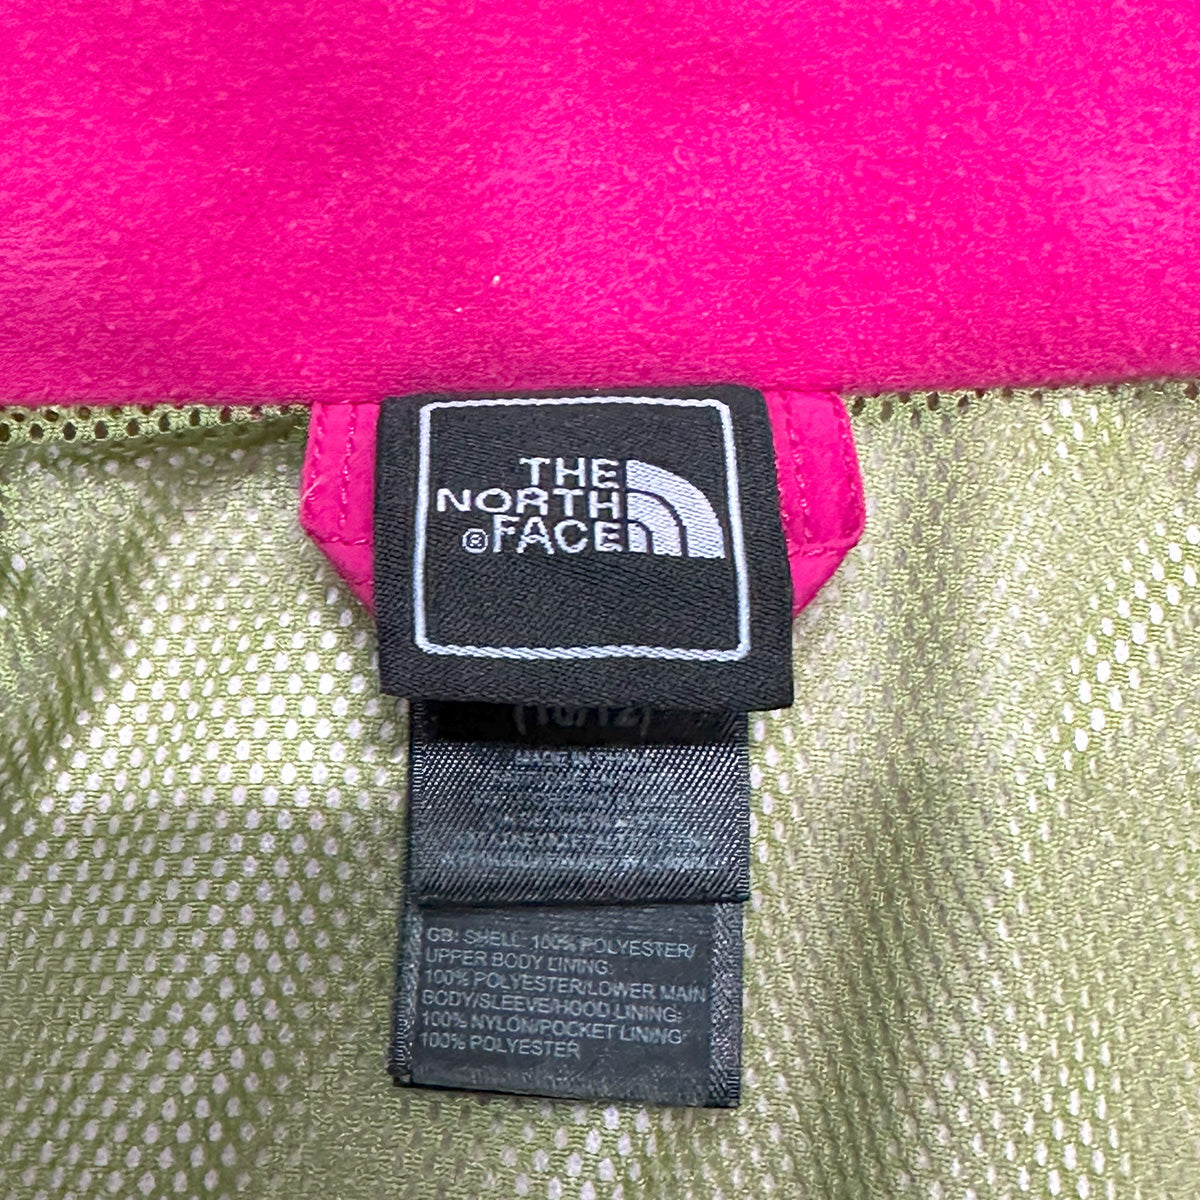 30063 【THE NORTH FACE】ザノースフェイス キッズ マウンテンパーカー ピンク M